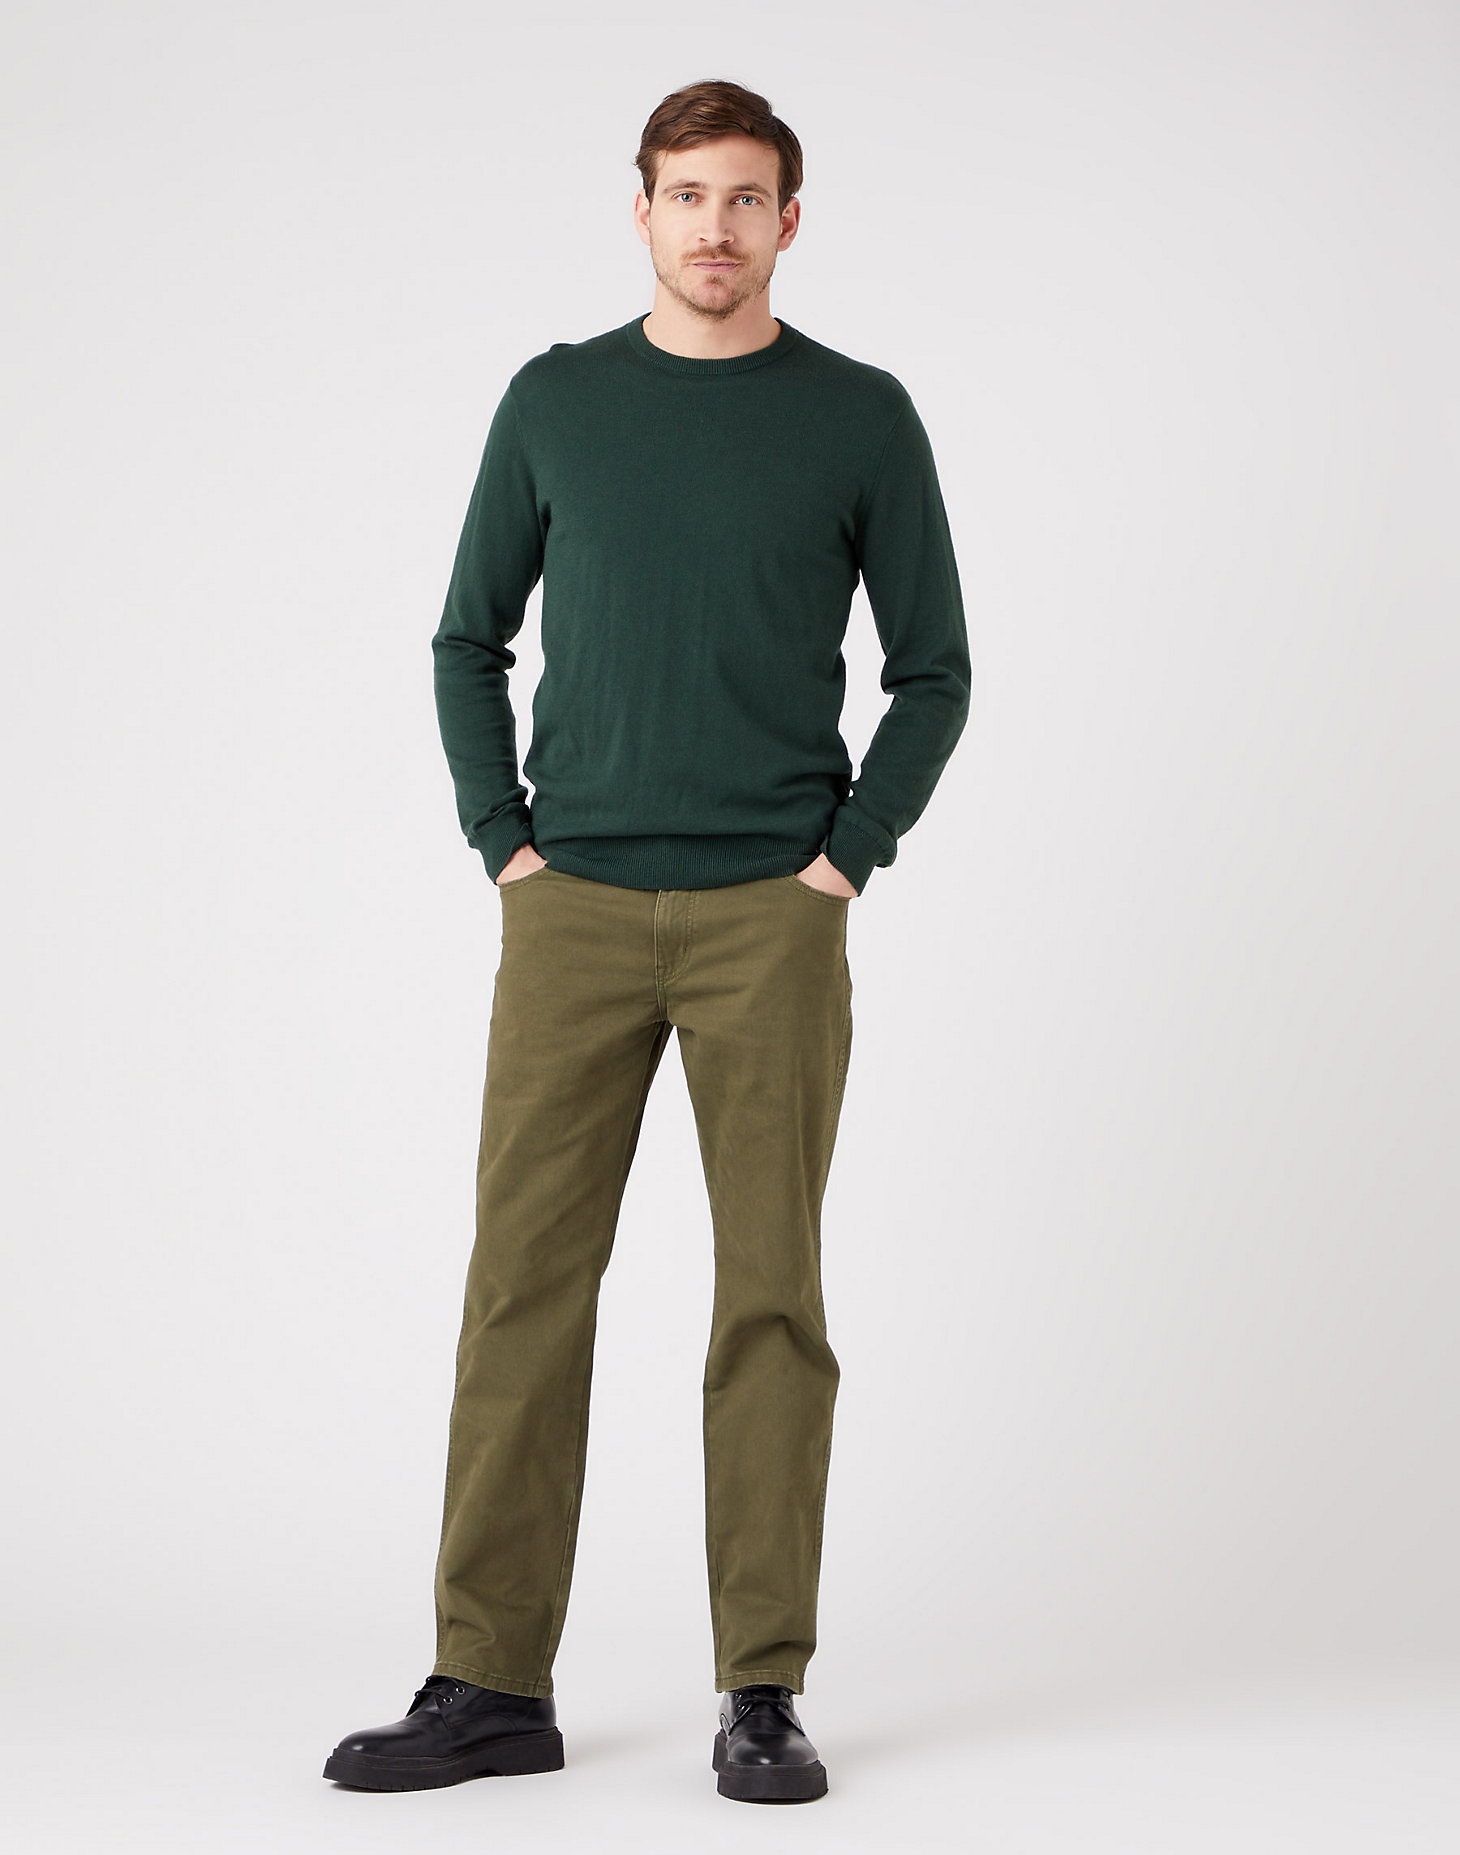 Crewneck Knit in Sycamore Green alternative view 1